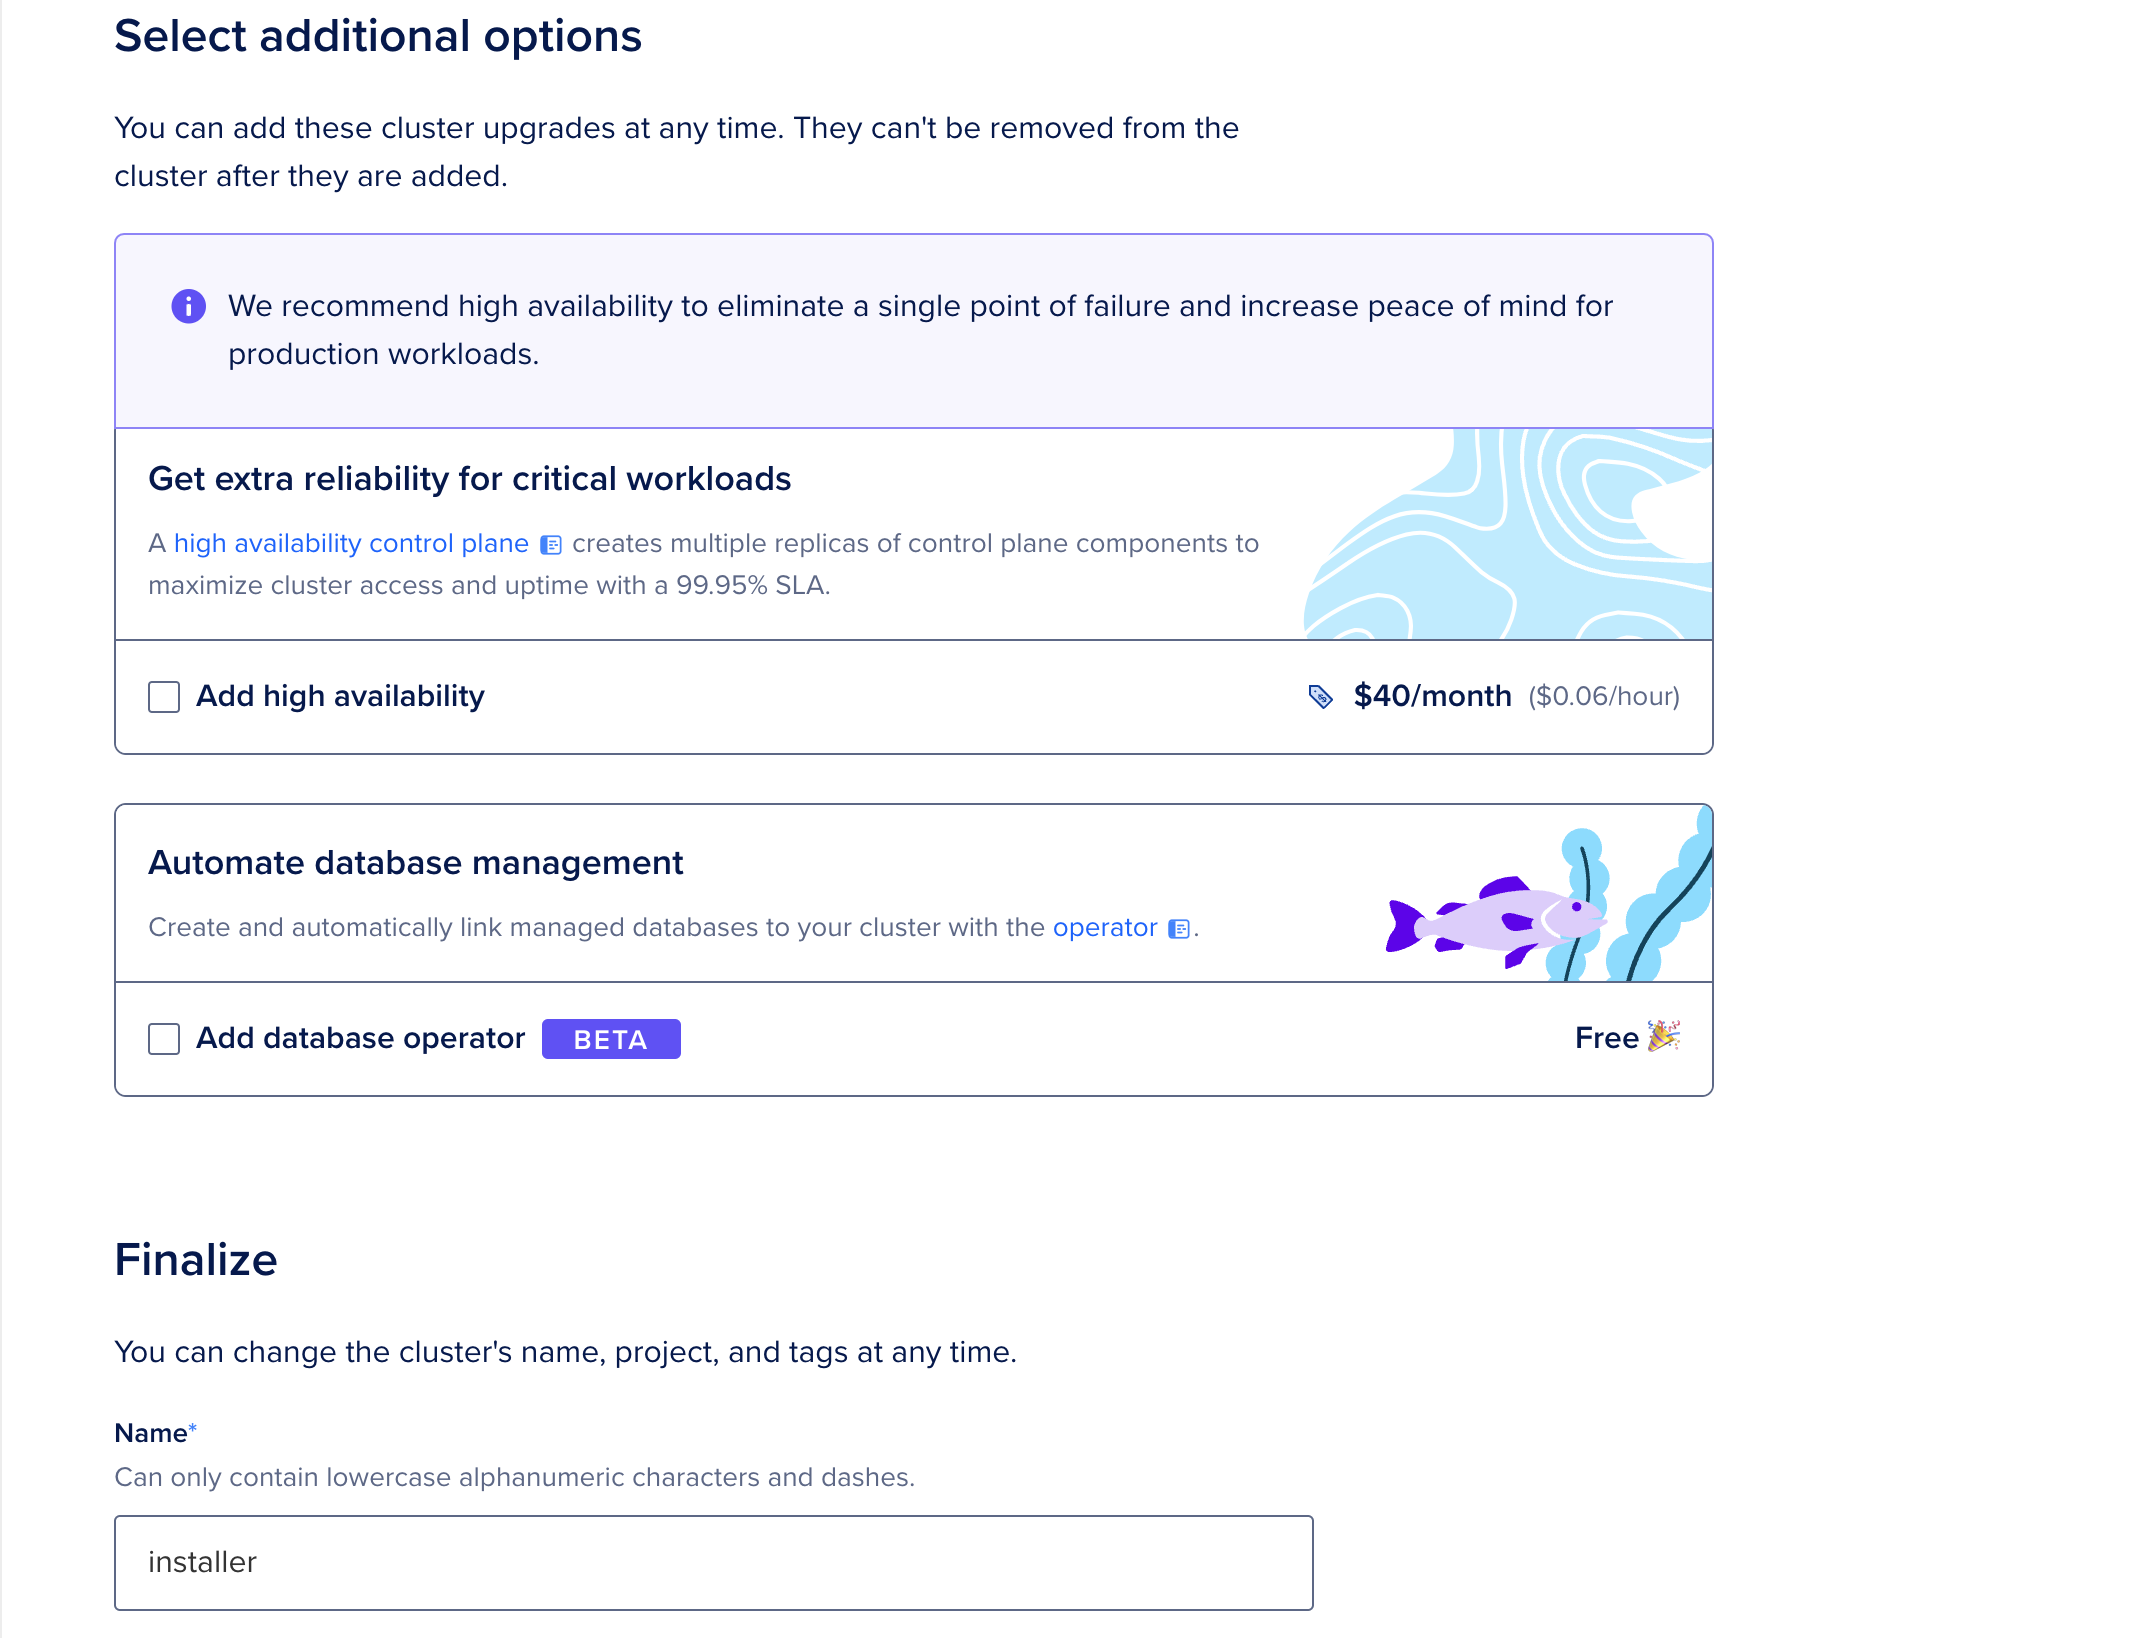 DigitalOcean Kubernetes cluster creation page showing the section about the additional options and cluster name.